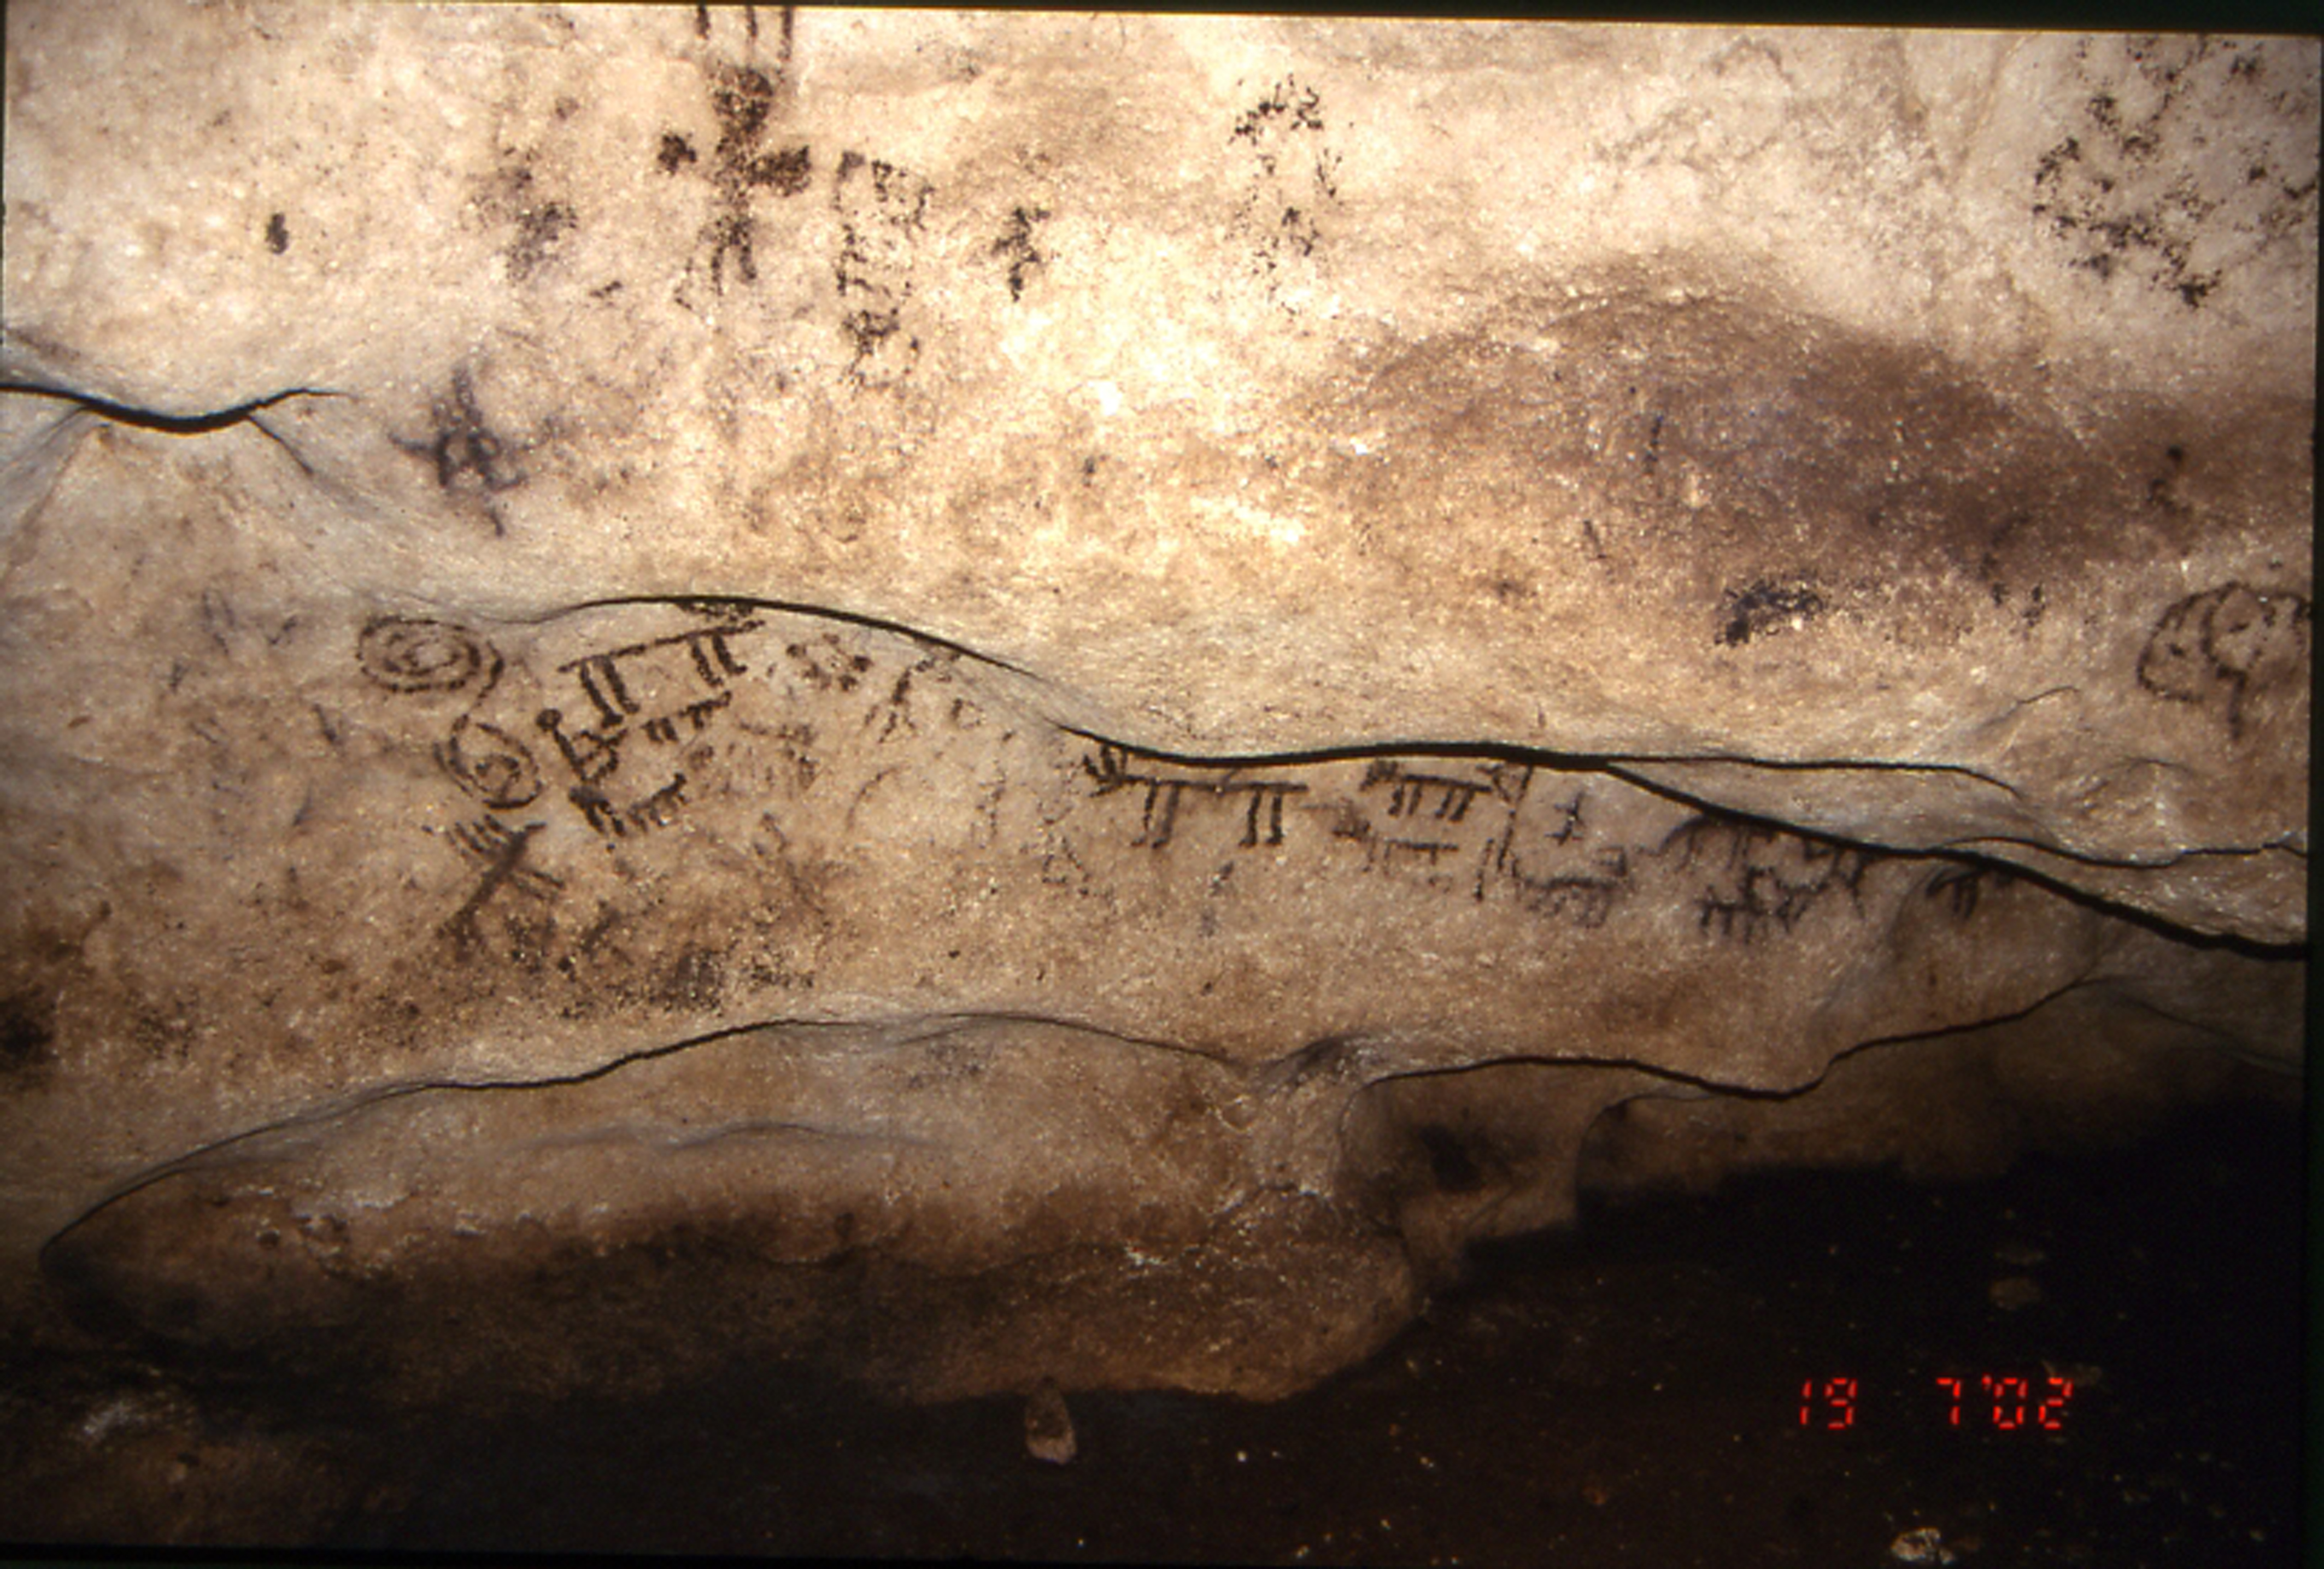 Image: The deer hunting scene (corridor 1, zone 2, and group 8) in the Porto Badisco cave (Otranto, Lecce, Puglia, Italy). General view of cave interior. By permission of the Ministry of Heritage and Culture and Tourism - Superintendence for Archaeological Heritage of Puglia - Stock Photo. (Copyrighted images. Not to be copied or exploited without prior permission)